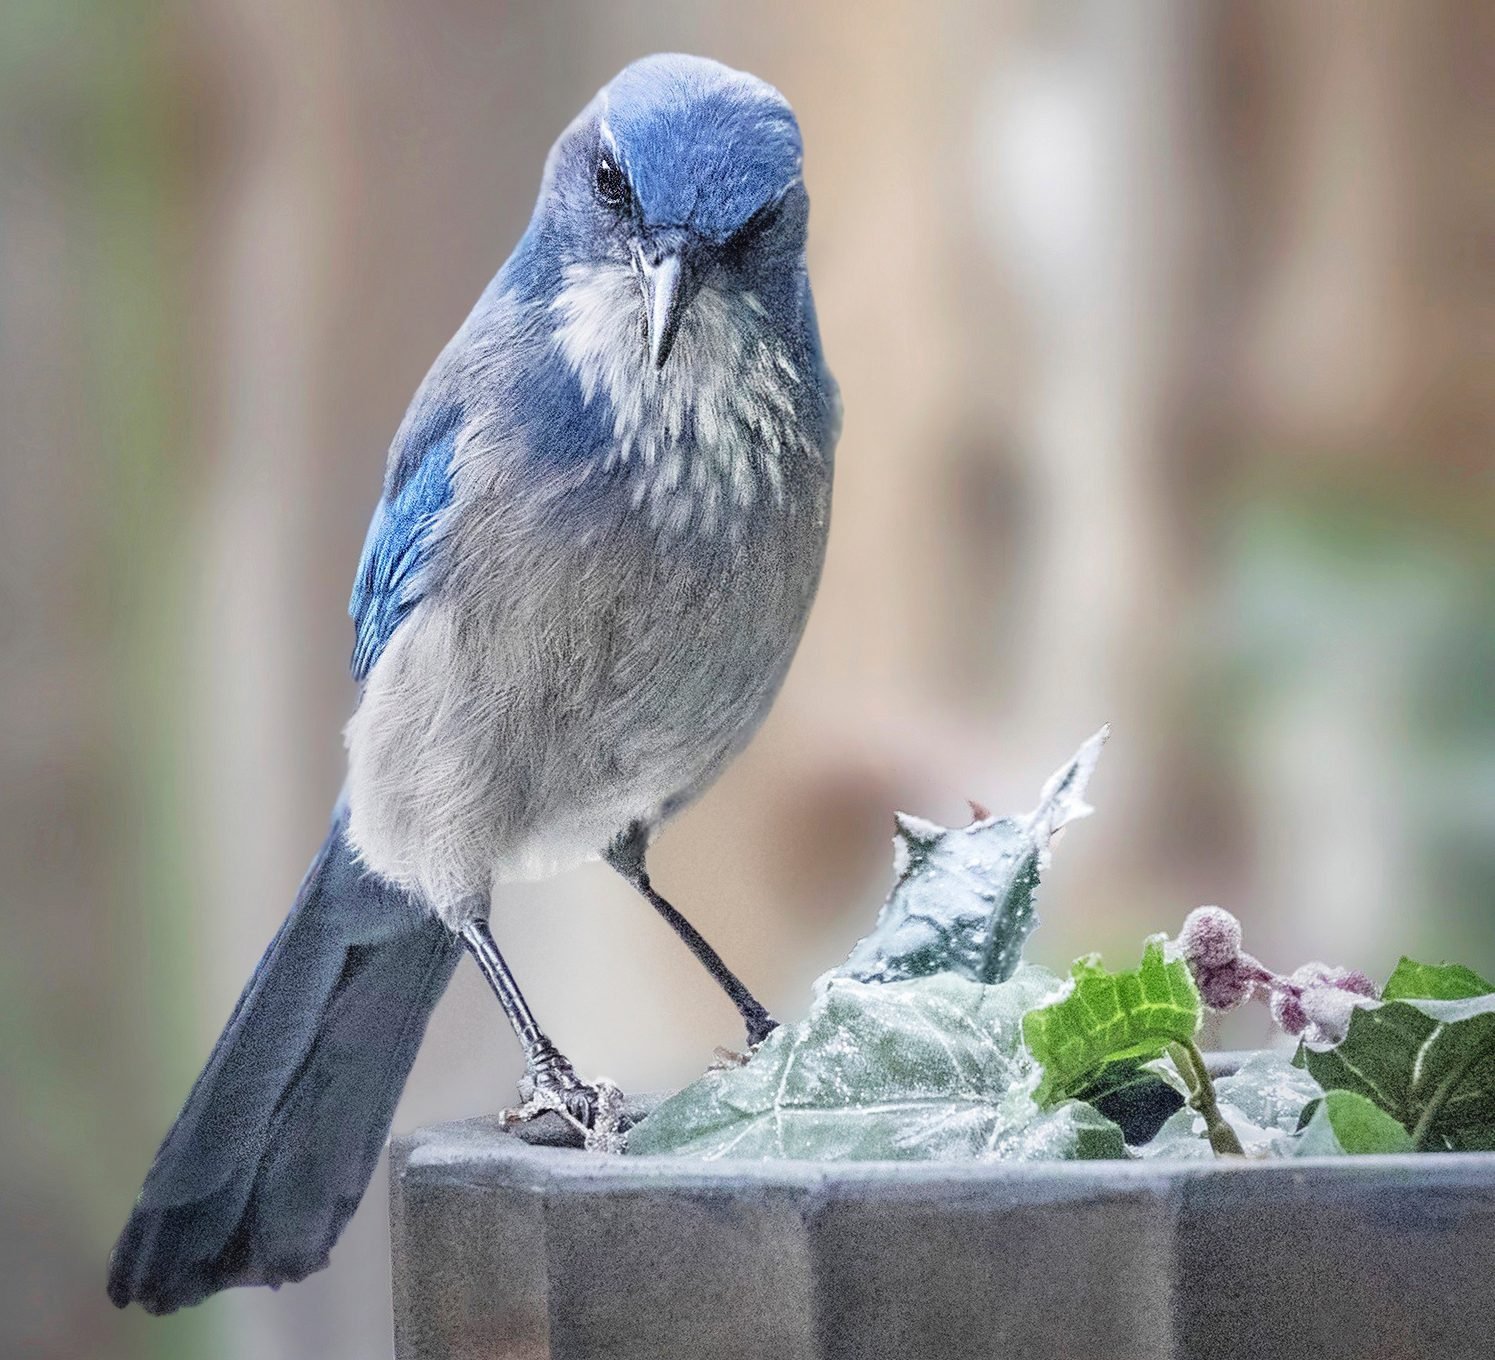 Meet the Jays: 8 Types of Jays You Should Know